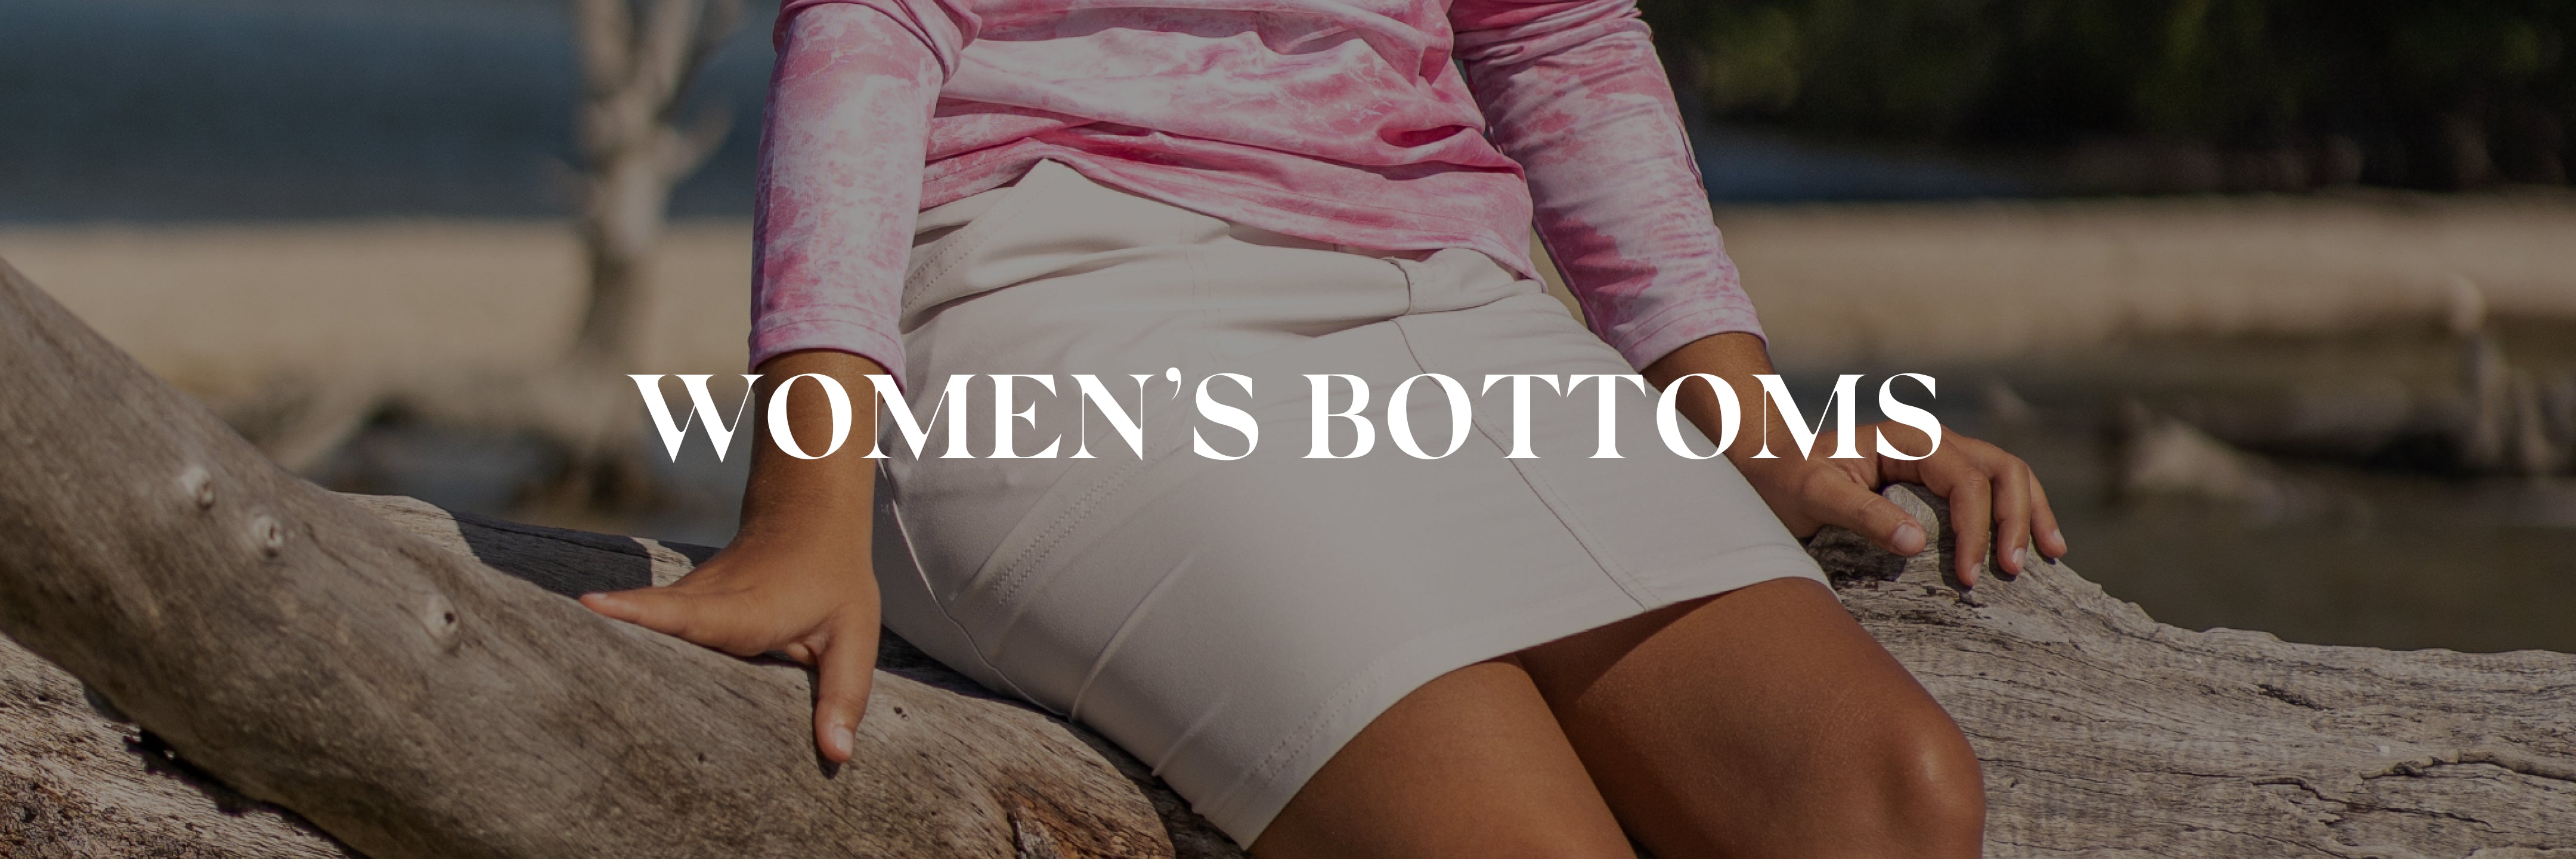 WOMEN'S BOTTOMS COLLECTION